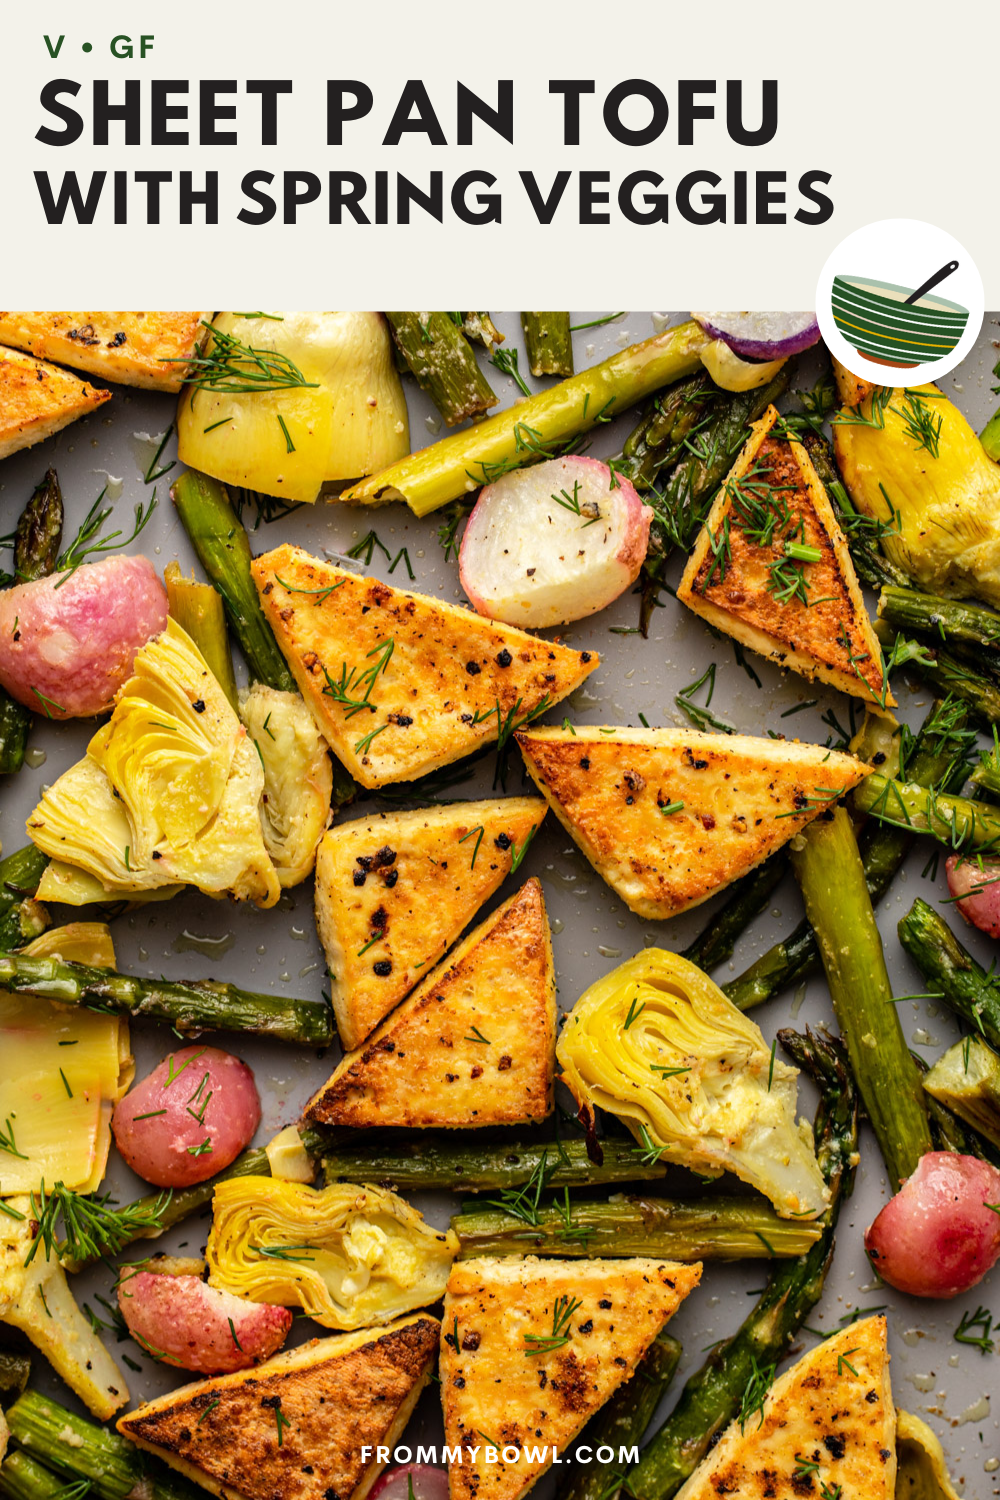 zoomed in image of baked veggies on a sheet pan